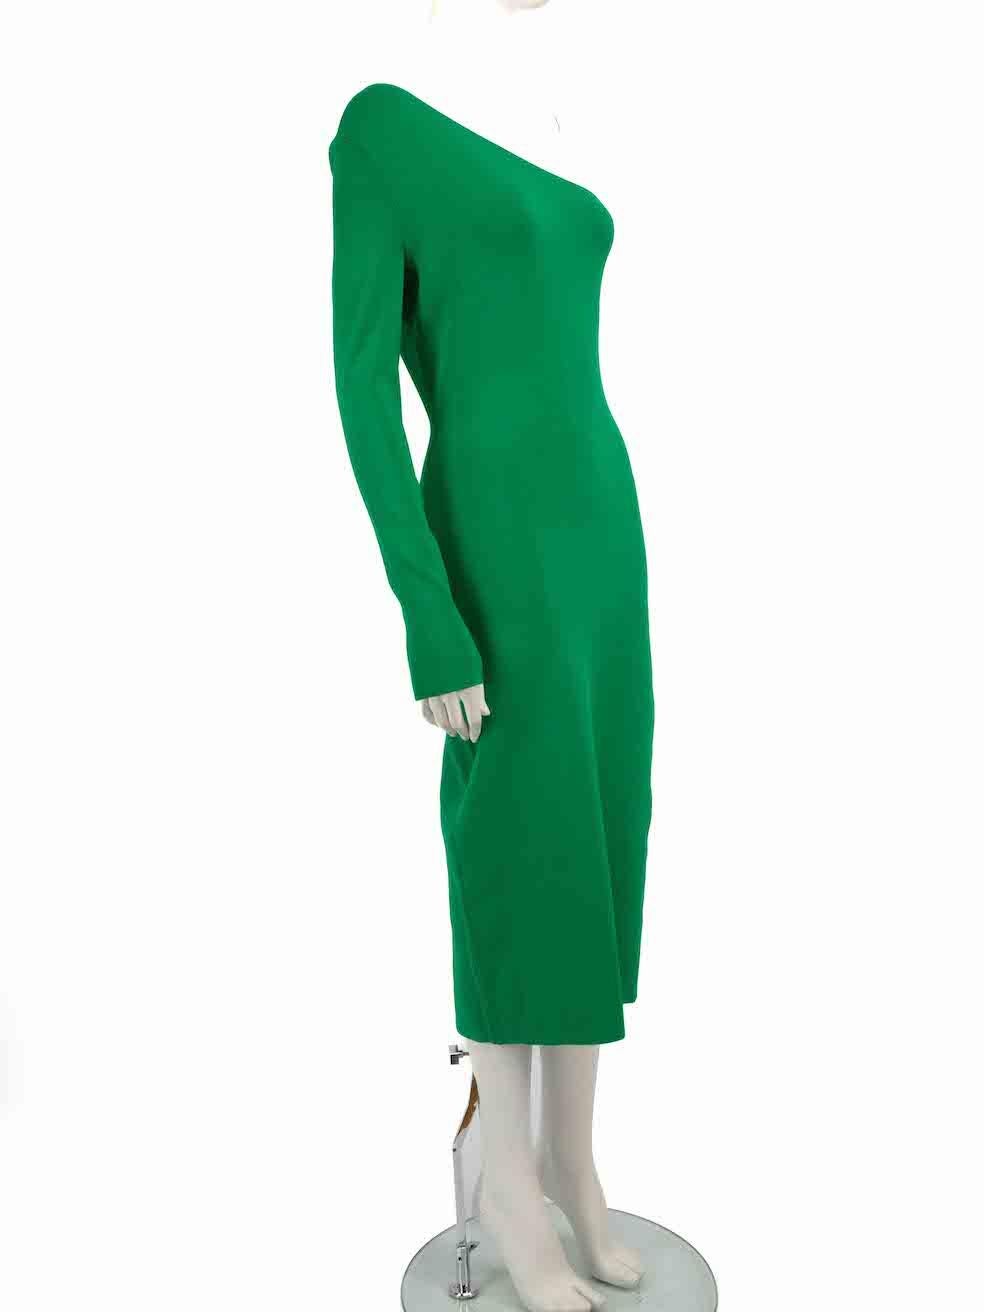 CONDITION is Very good. Hardly any visible wear to dress is evident on this used VB Body Victoria Beckham designer resale item.
 
 
 
 Details
 
 
 Green
 
 Viscose
 
 Bodycon dress
 
 One shoulder
 
 Long sleeve
 
 Stretchy
 
 Figure hugging fit
 
